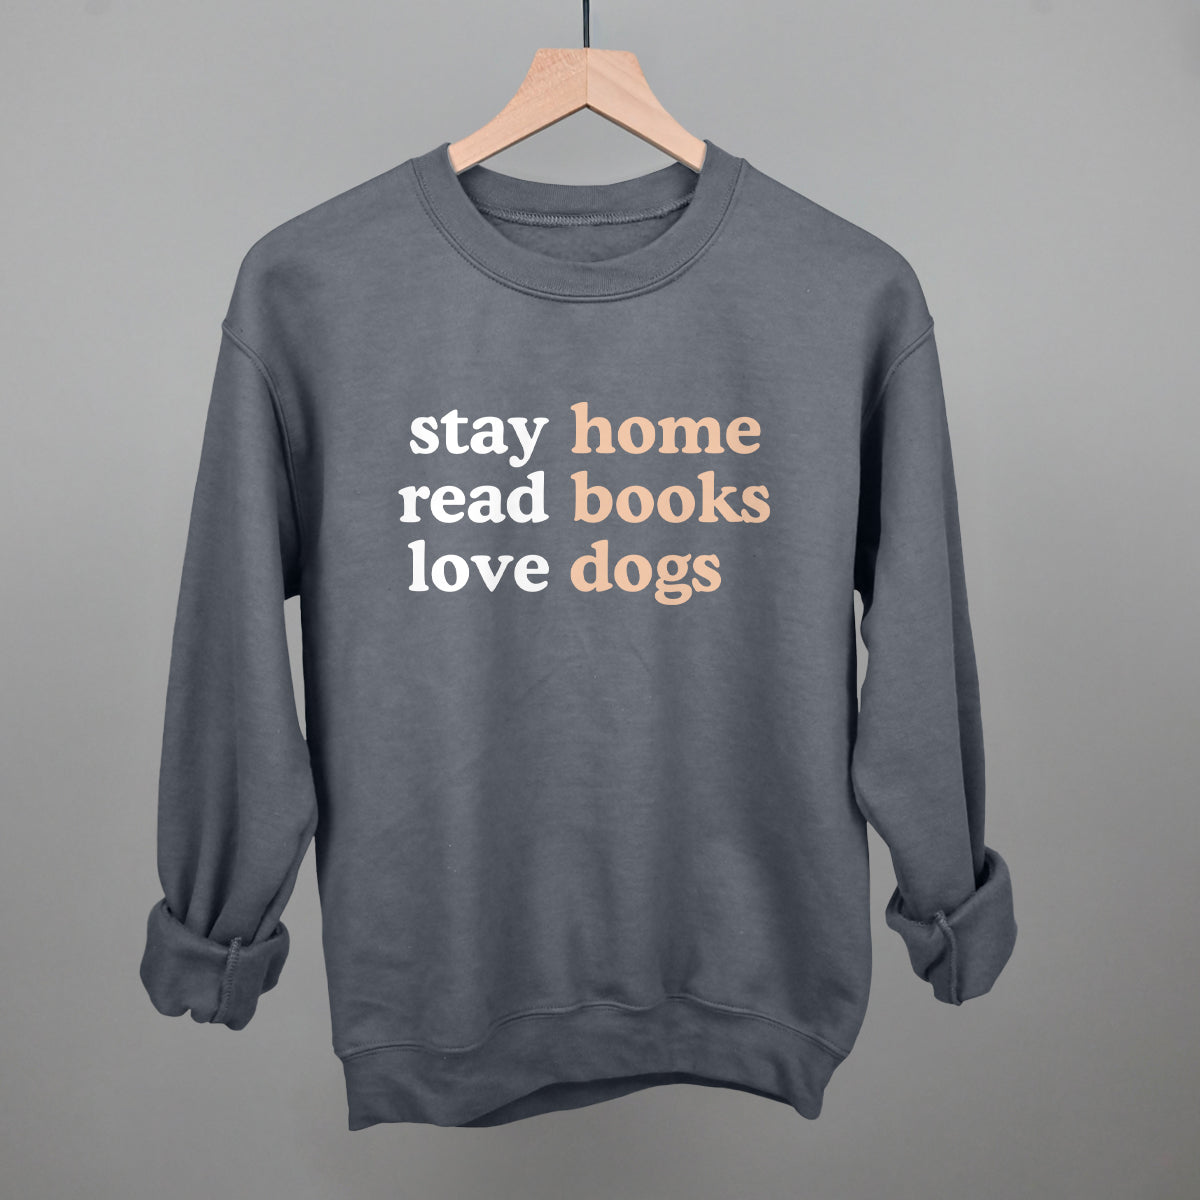 Books　Read　Cloth　Stay　Ivy　Dogs　Home　Love　–